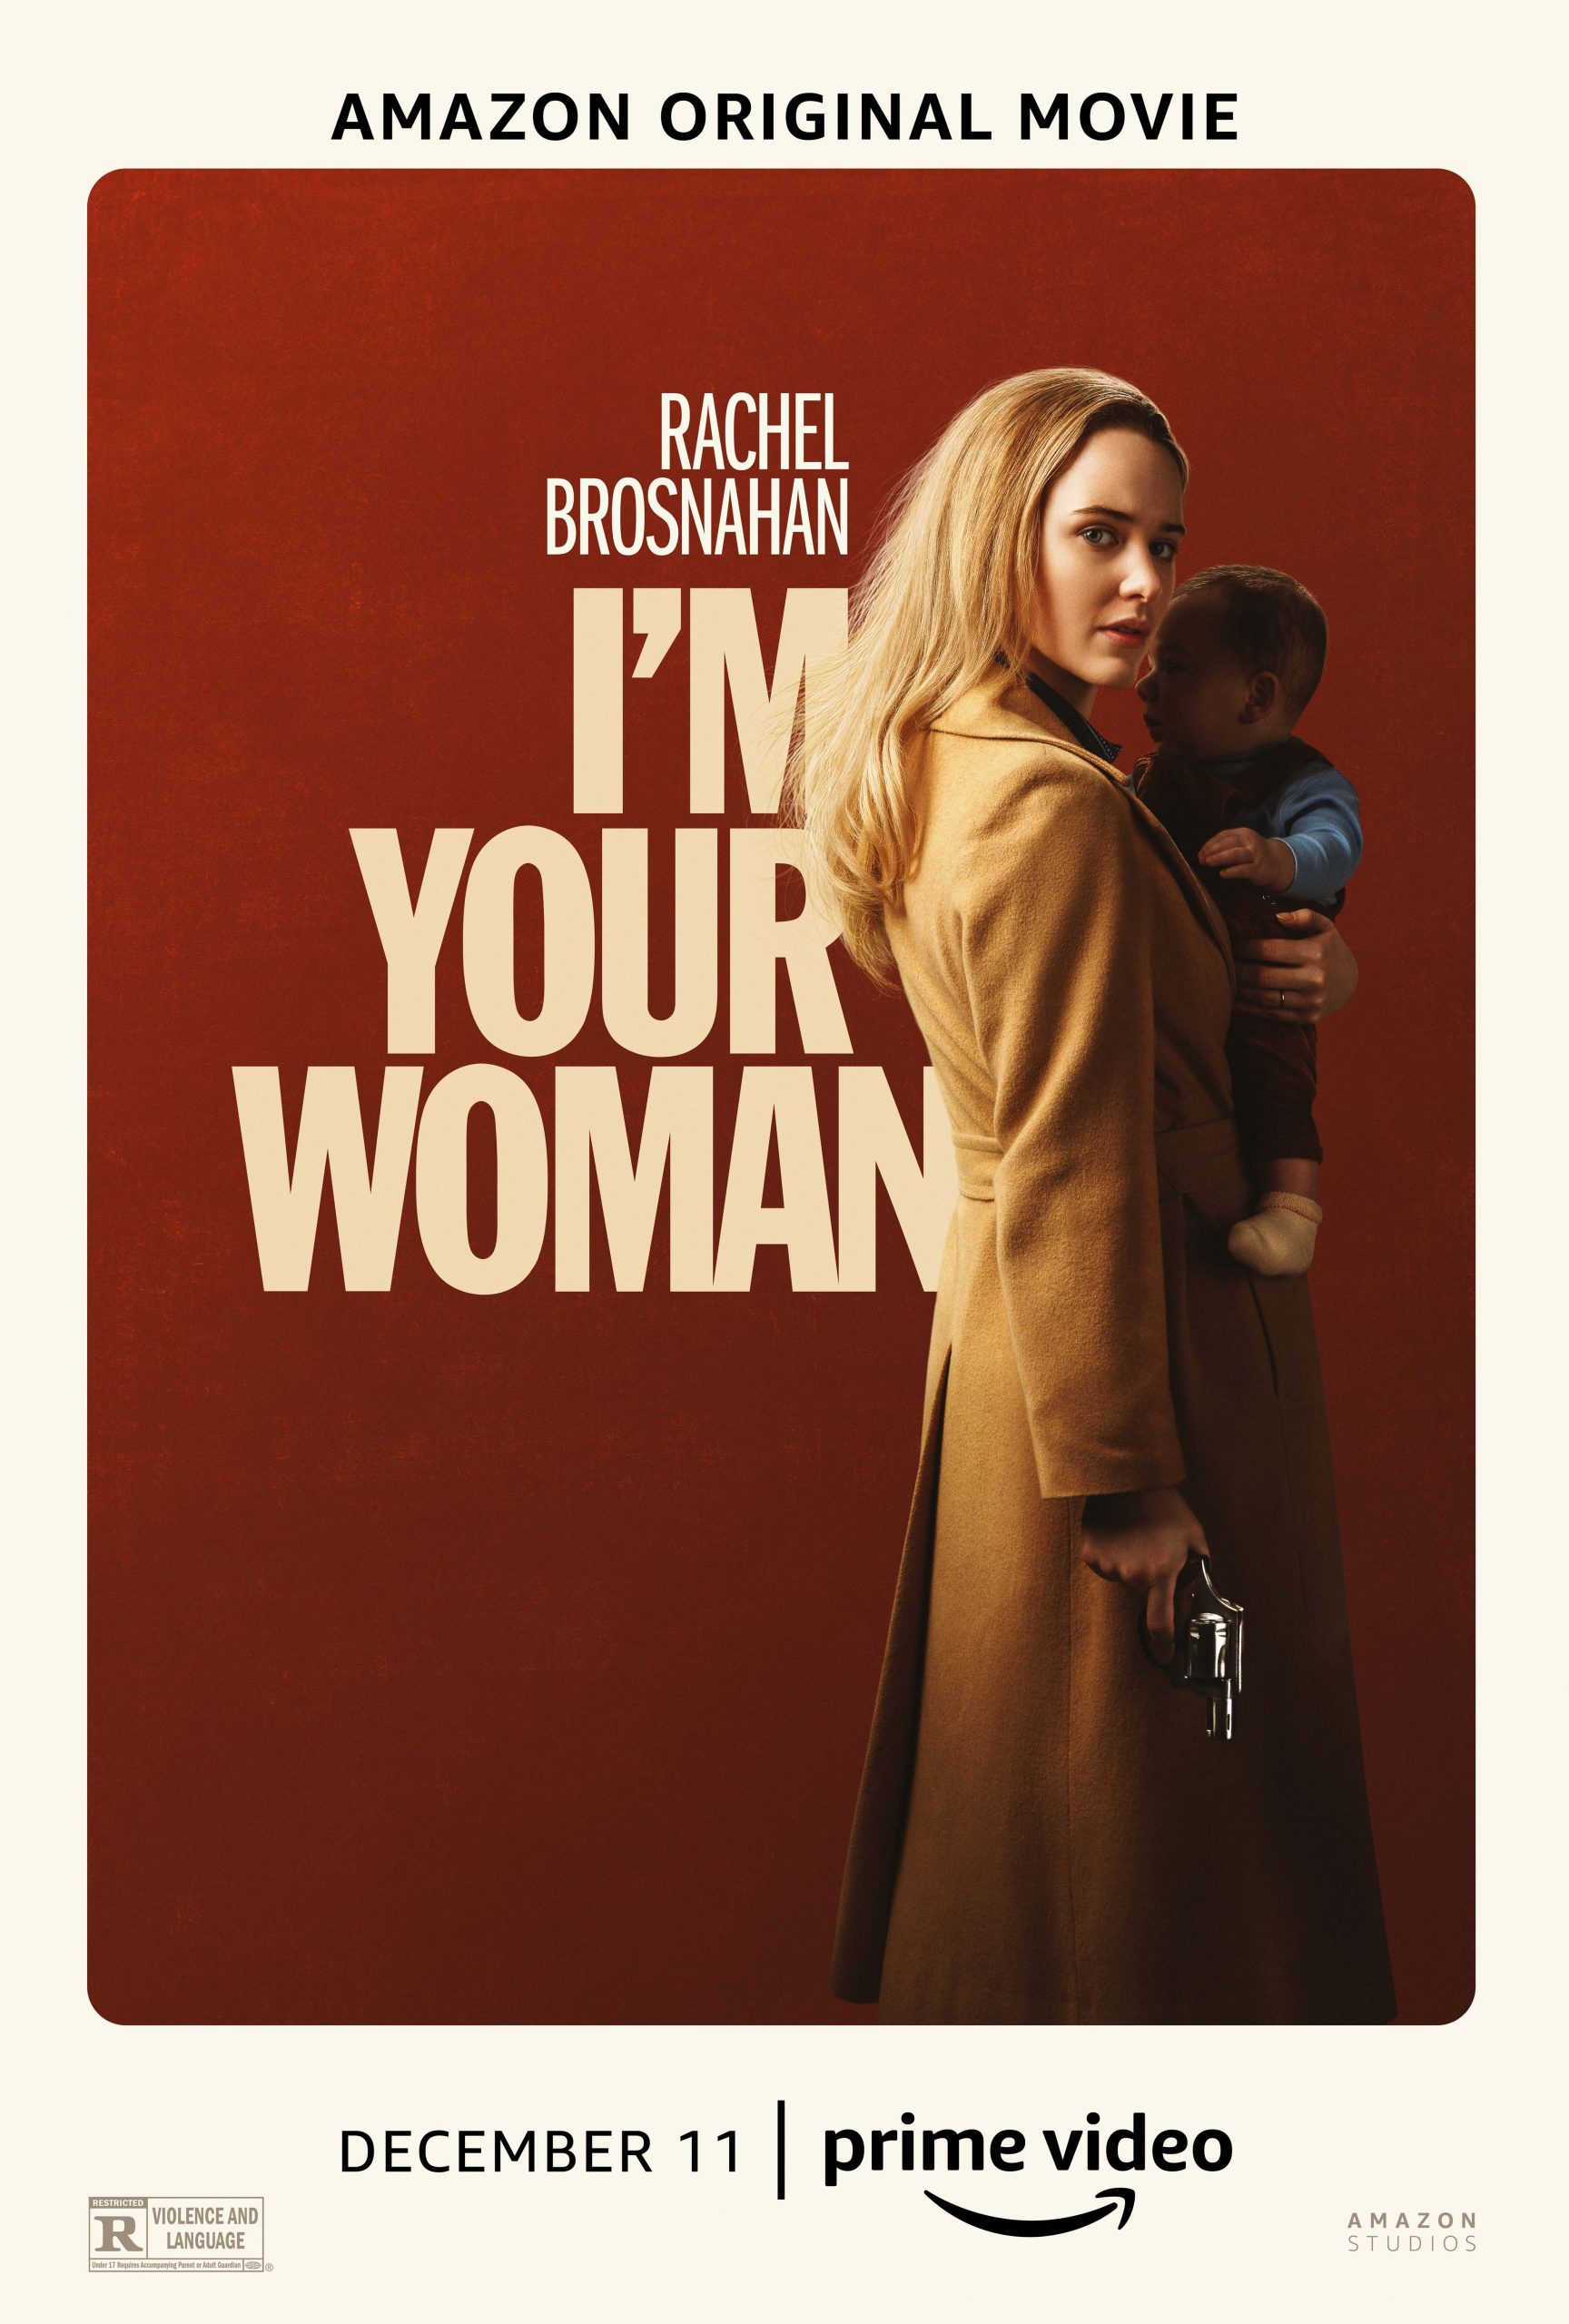 New Movie: I’m Your Woman Starring Rachel Brosnahan